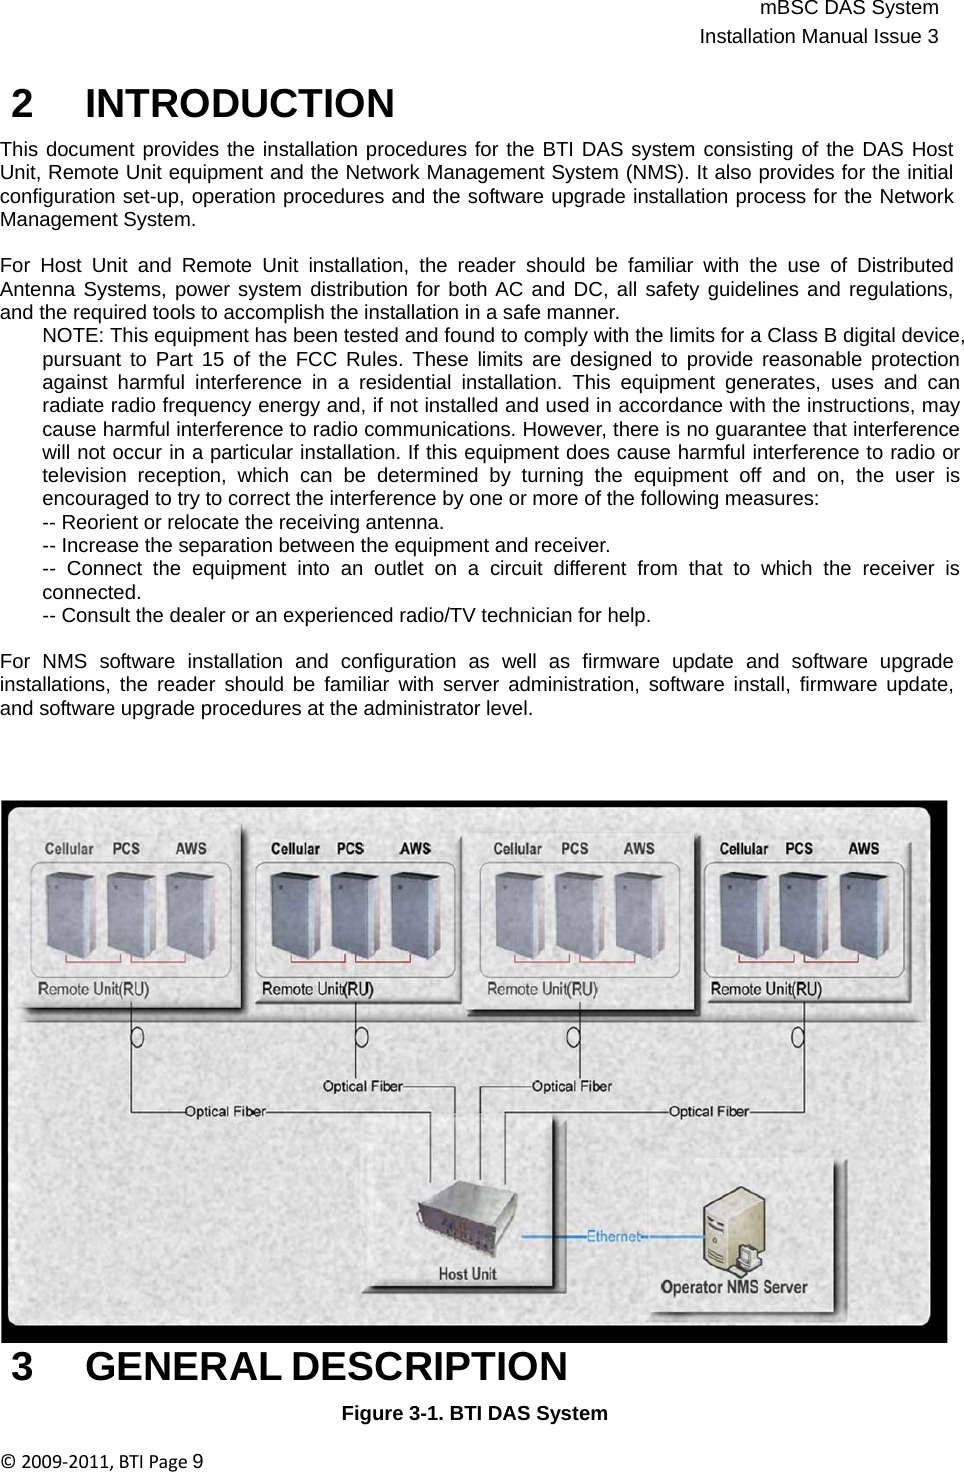 mBSC DAS SystemInstallation Manual Issue 3©2009‐2011,BTIPage9   2 INTRODUCTION  This document provides the installation procedures for the BTI DAS system consisting of the DAS Host Unit, Remote Unit equipment and the Network Management System (NMS). It also provides for the initial configuration set-up, operation procedures and the software upgrade installation process for the Network Management System.  For Host Unit and Remote Unit installation, the reader should be familiar with the use of Distributed Antenna Systems, power system distribution for both AC and DC, all safety guidelines and regulations, and the required tools to accomplish the installation in a safe manner. NOTE: This equipment has been tested and found to comply with the limits for a Class B digital device, pursuant to Part 15 of the FCC Rules. These limits are designed to provide reasonable protection against harmful interference in a residential installation. This equipment generates, uses and can radiate radio frequency energy and, if not installed and used in accordance with the instructions, may cause harmful interference to radio communications. However, there is no guarantee that interference will not occur in a particular installation. If this equipment does cause harmful interference to radio or television reception, which can be determined by turning the equipment off and on, the user is encouraged to try to correct the interference by one or more of the following measures: -- Reorient or relocate the receiving antenna. -- Increase the separation between the equipment and receiver. -- Connect the equipment into an outlet on a circuit different from that to which the receiver is connected. -- Consult the dealer or an experienced radio/TV technician for help.  For  NMS  software  installation  and  configuration  as  well  as  firmware  update  and  software  upgrade installations, the reader should be familiar with server administration, software install, firmware update, and software upgrade procedures at the administrator level.                                3 GENERAL DESCRIPTION  Figure 3-1. BTI DAS System  